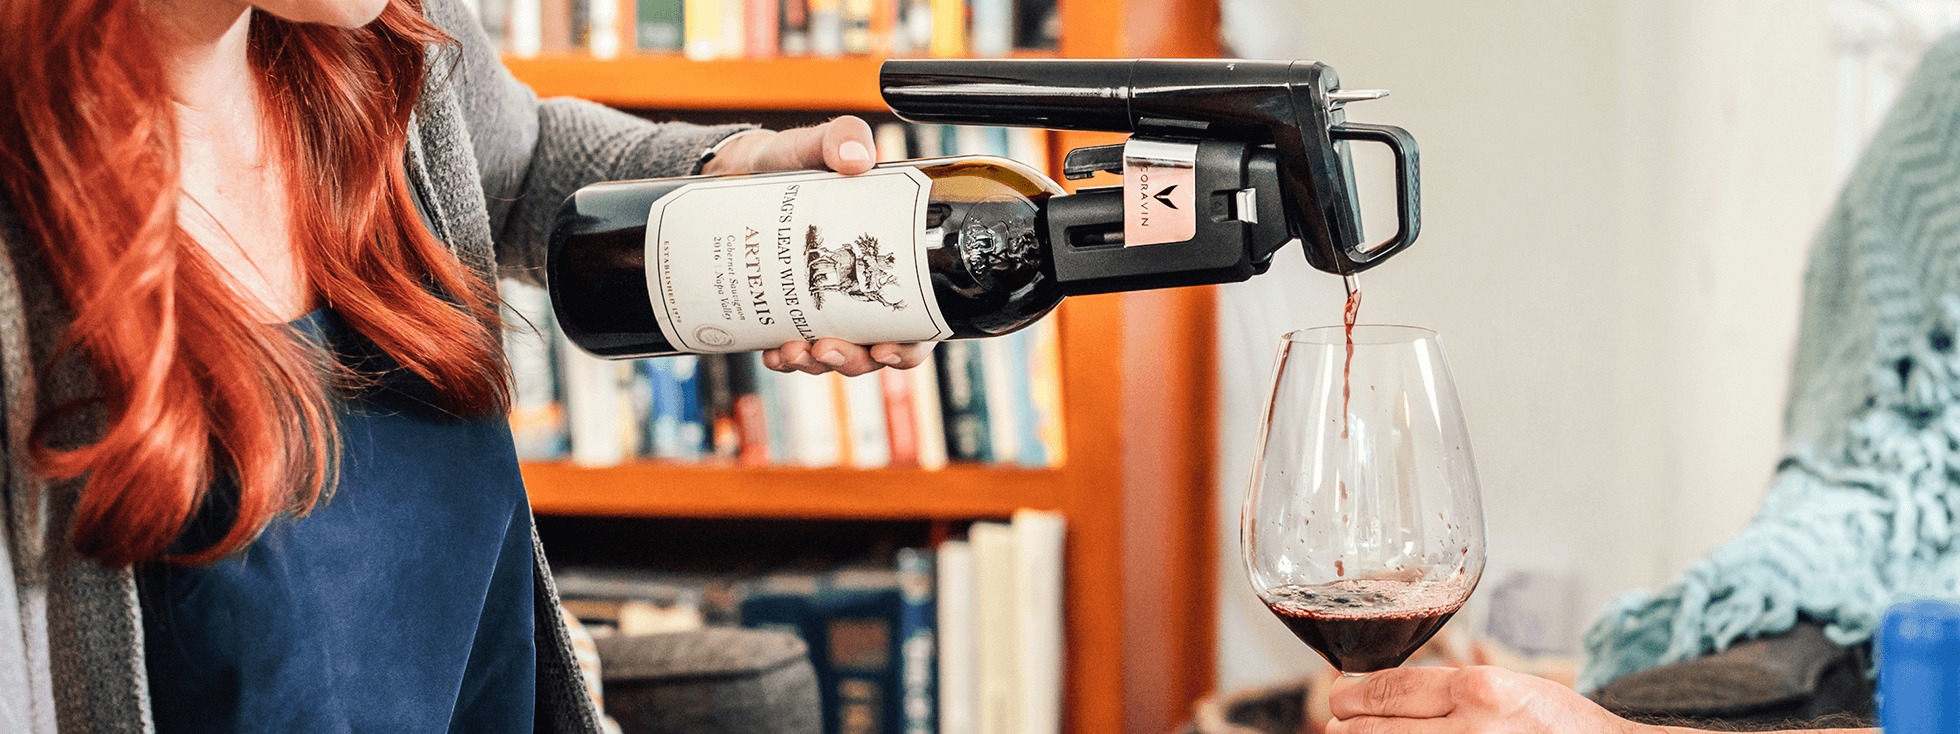 How-to-preserve-an-open-bottle-of-wine Hero-Banner